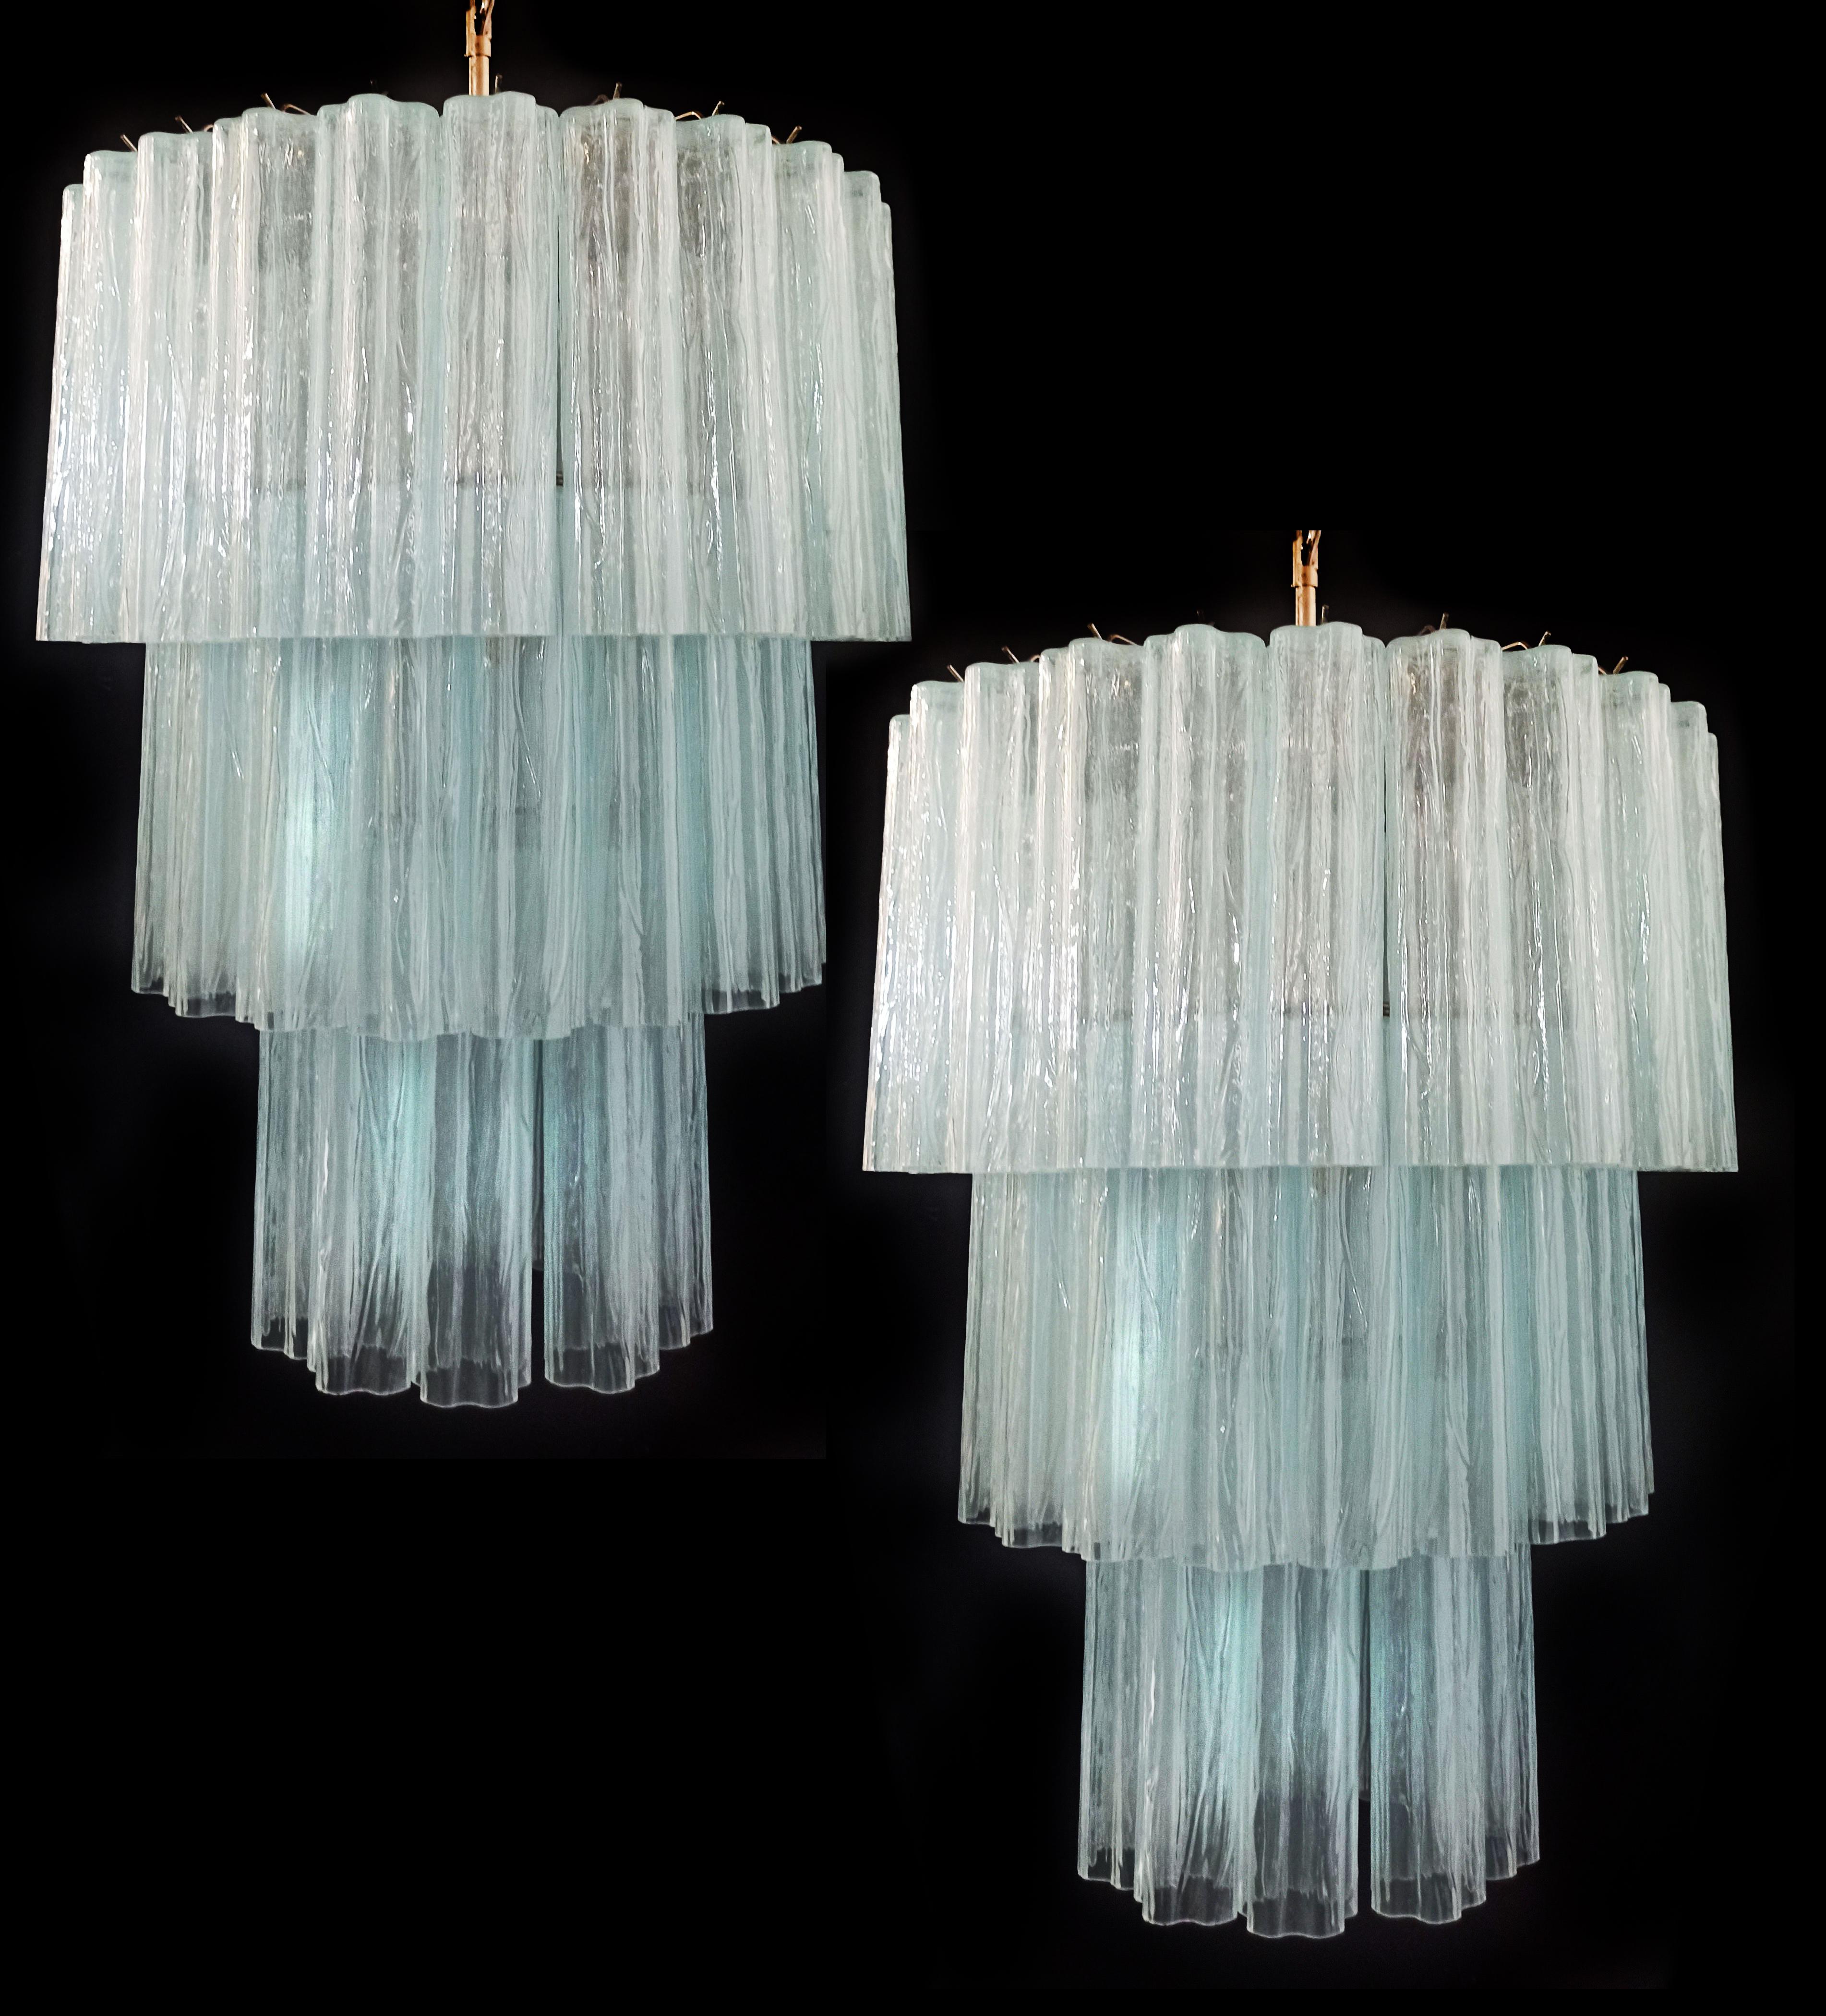 Pair Italian vintage chandeliers in Murano glass and nickel-plated metal structure. The armor polished nickel supports 52 large OPAL SILK glass tubes in a star shape.
Period: late XX century
Dimensions: 58,90 inches (152 cm) height with chain;